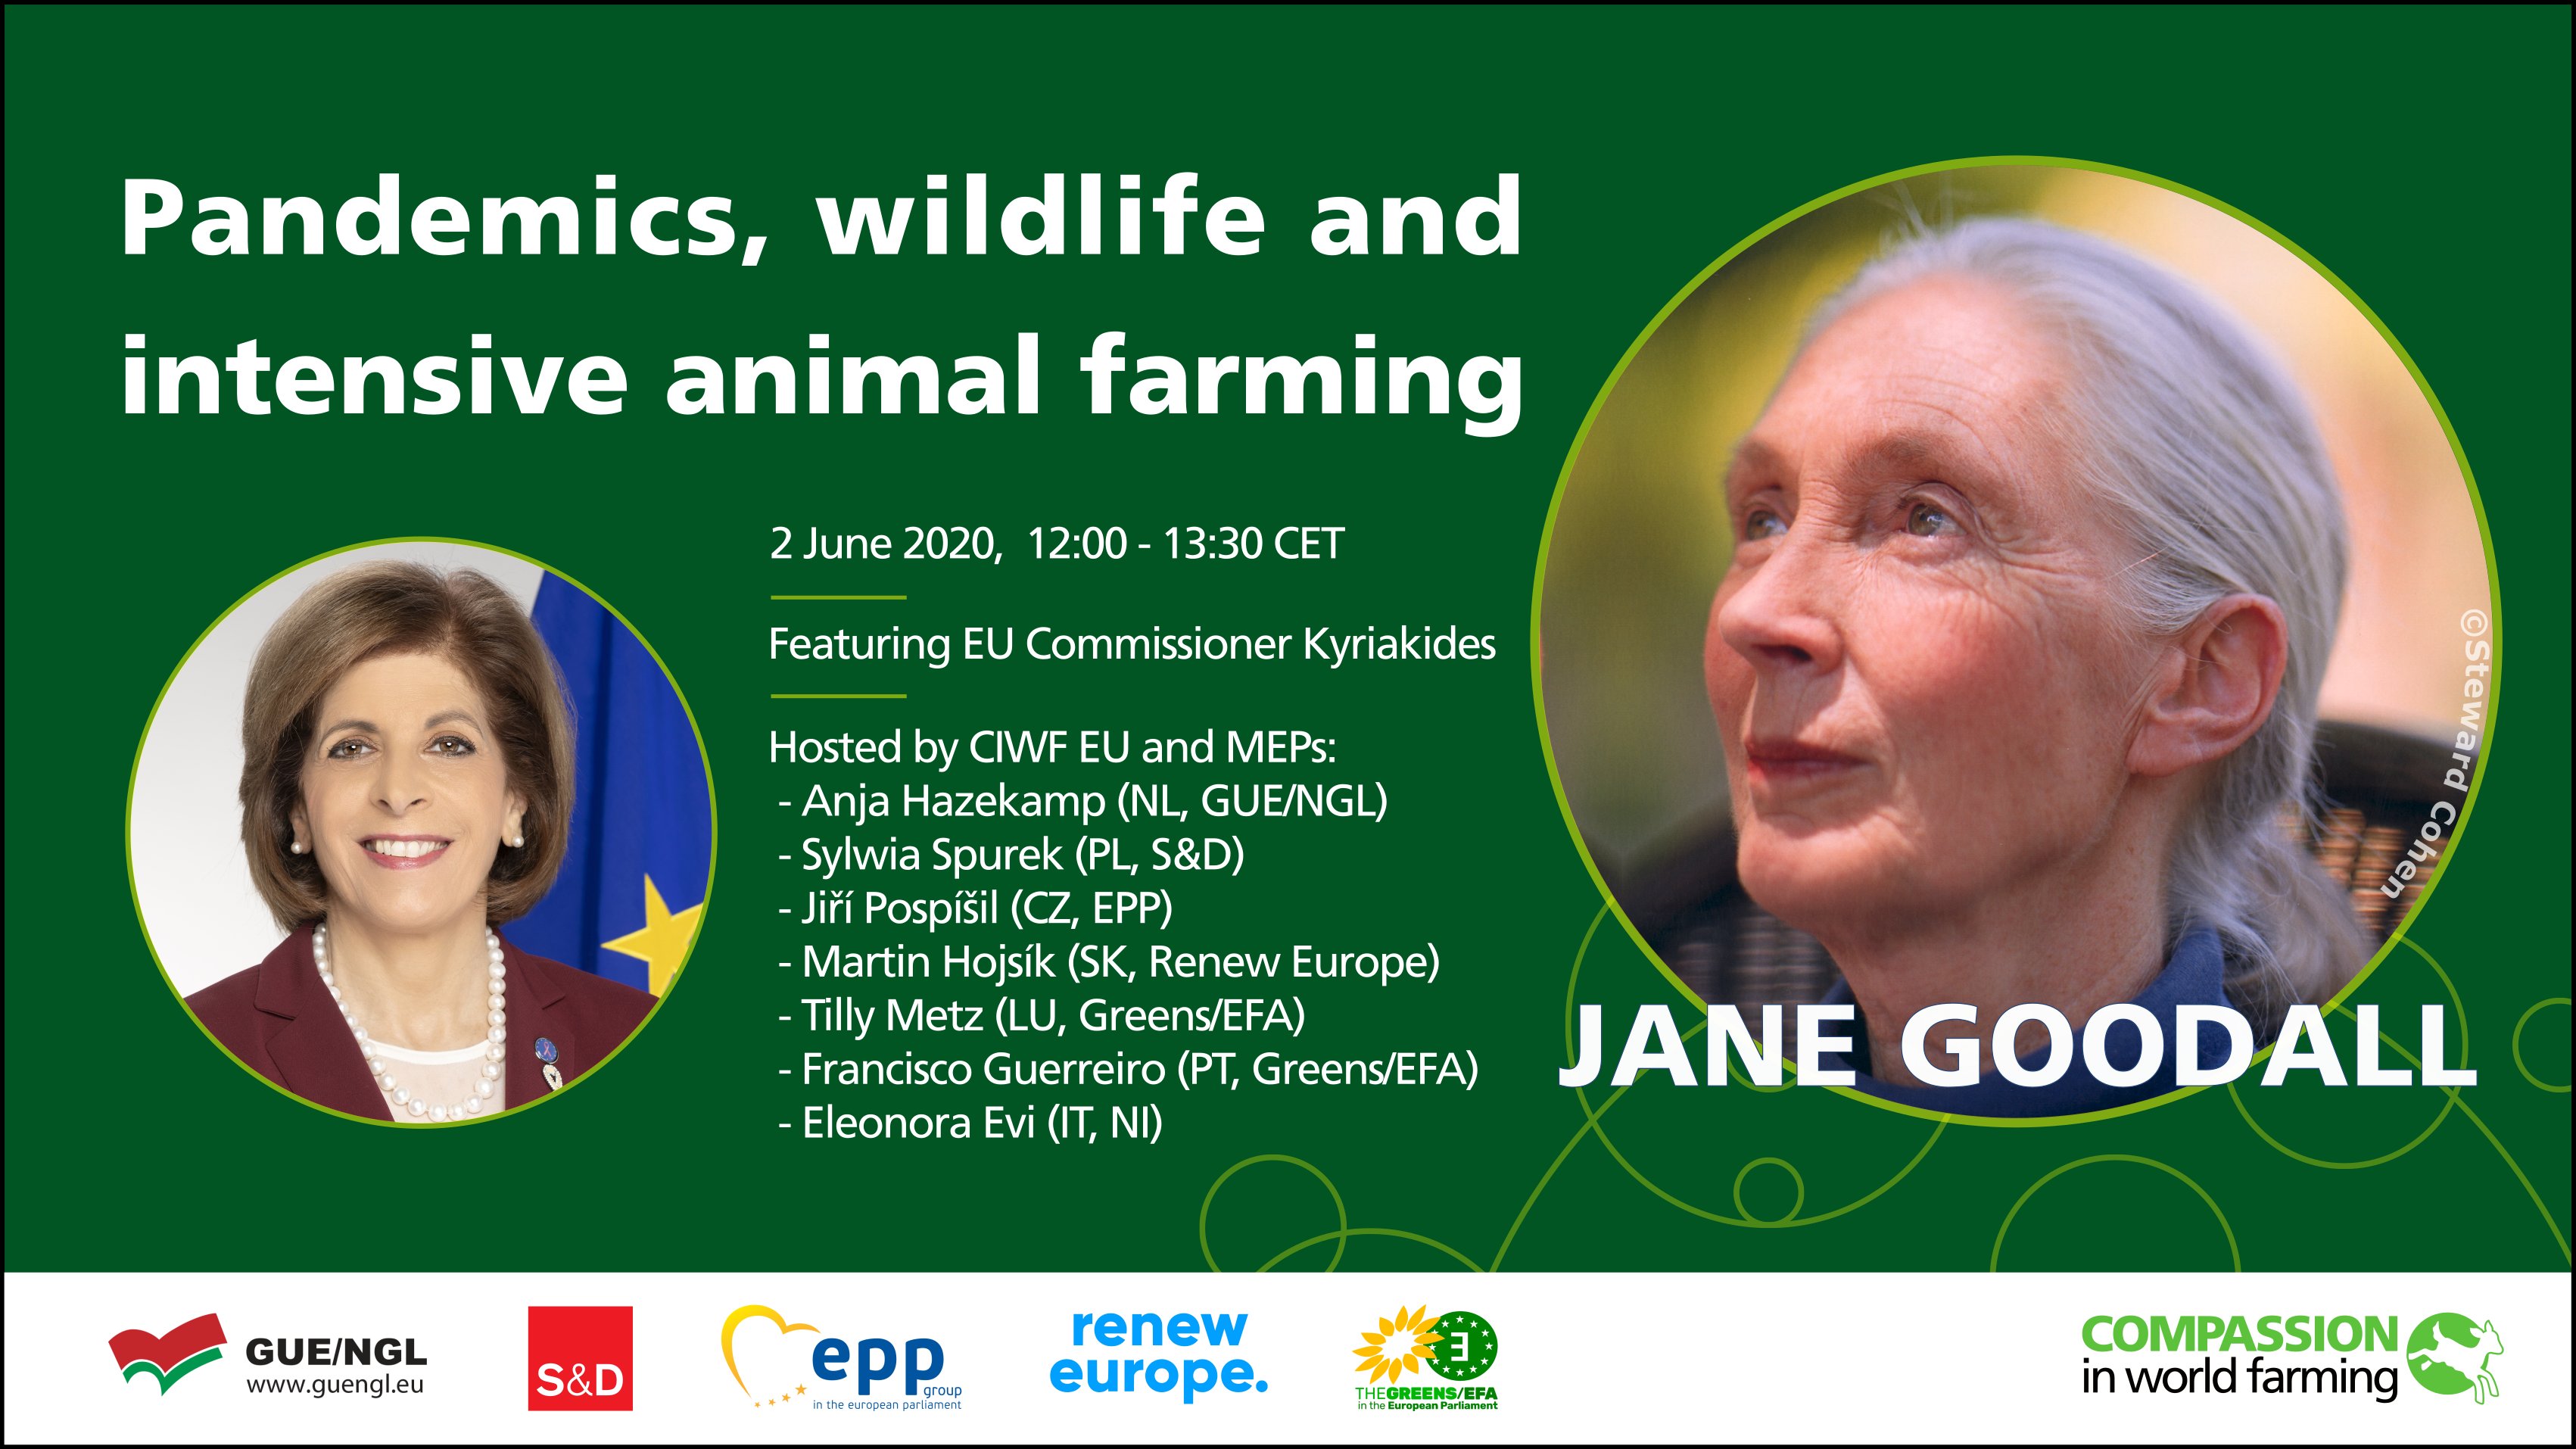 PAN MEP and primatologist Jane Goodall together in webinar